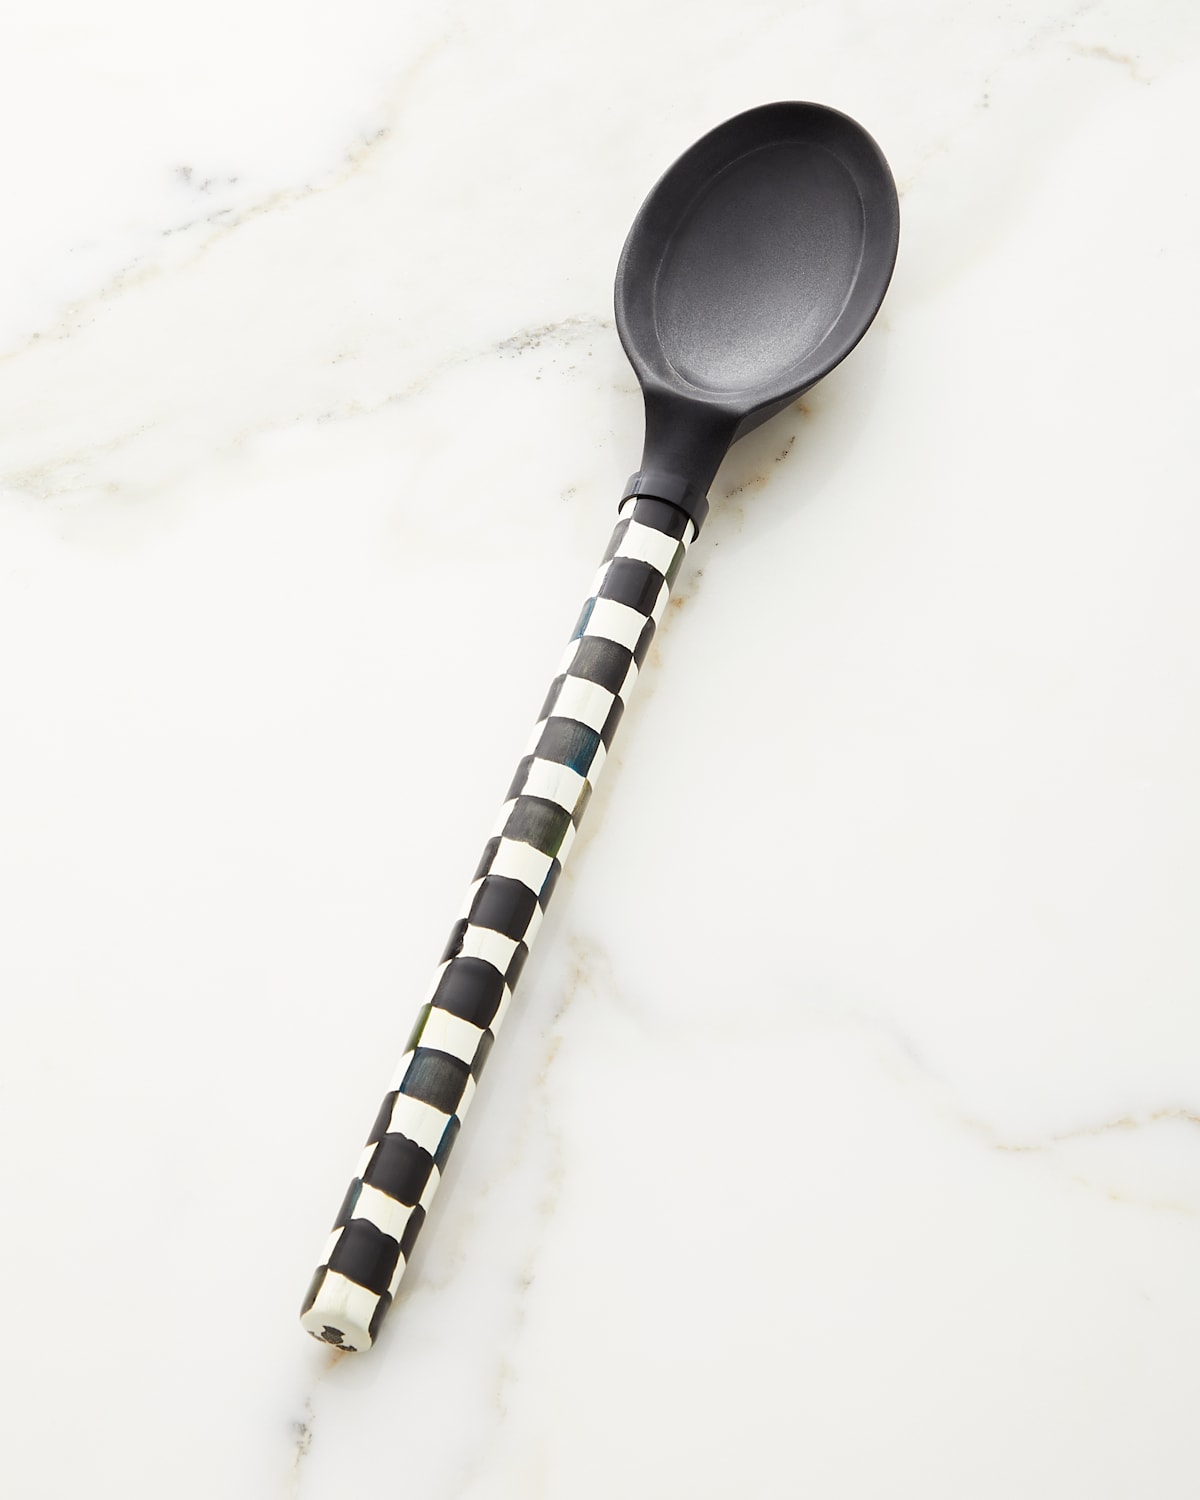 Mackenzie-childs Courtly Check Spoon, Black